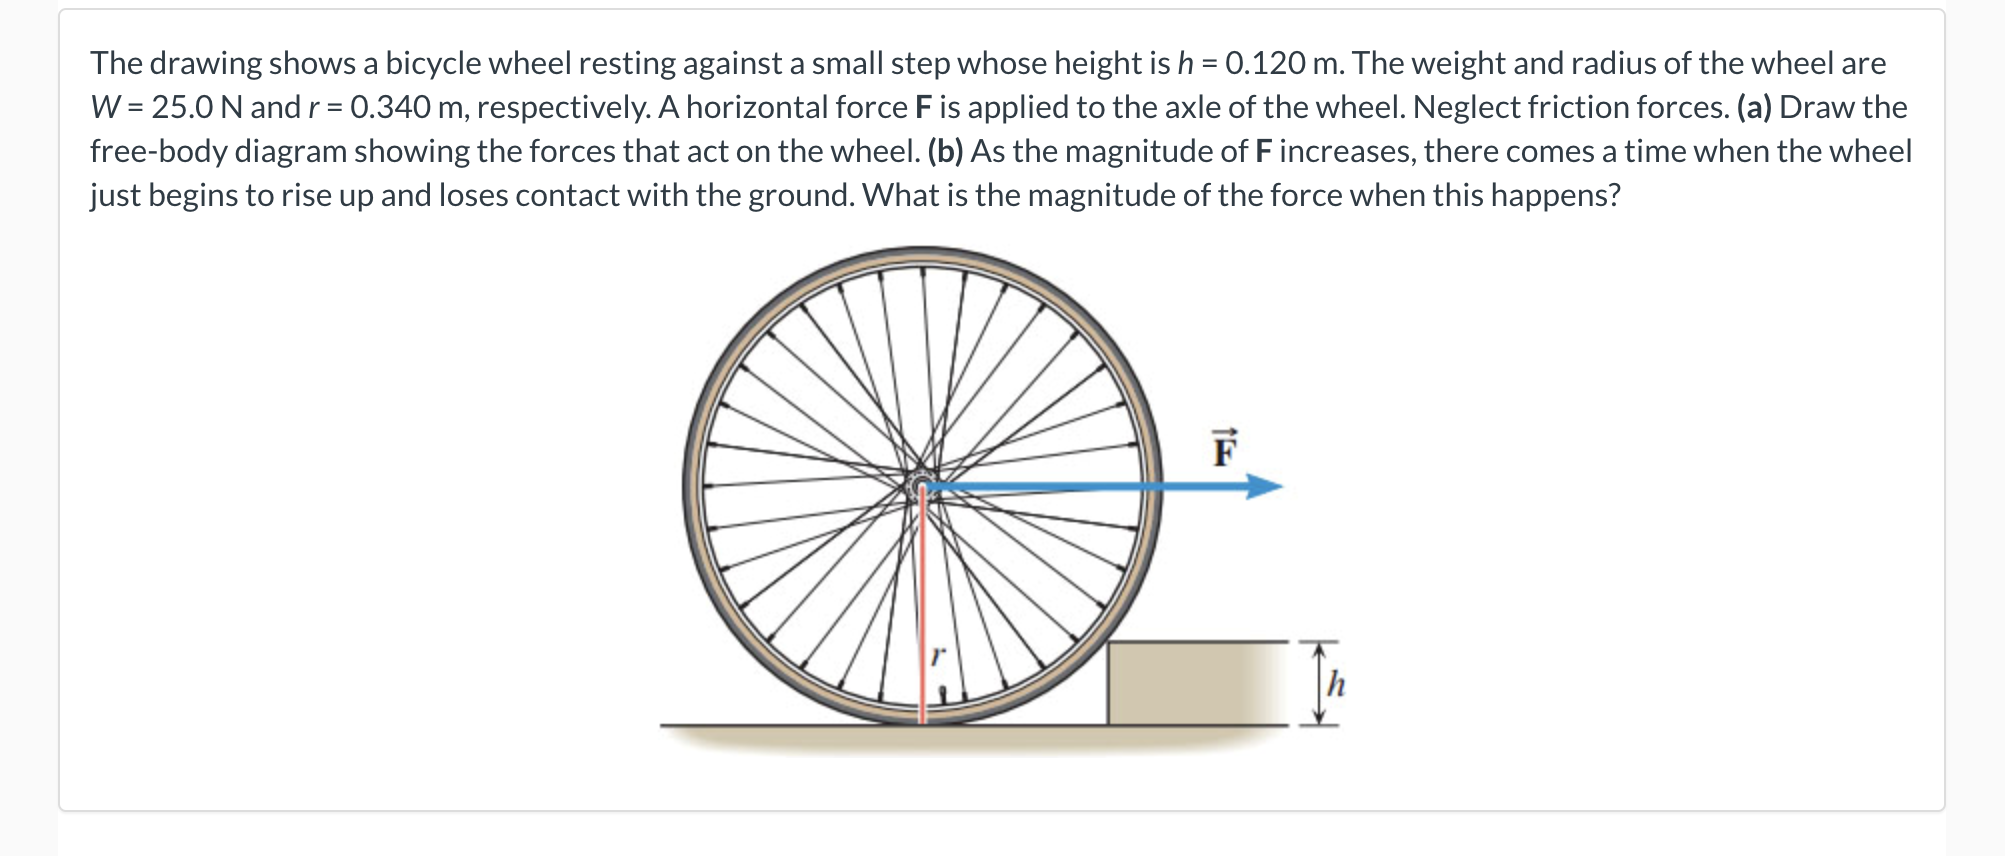 The drawing shows a bicycle wheel resting against a small step whose height is h = 0.120 m. The weight and radius of the wheel are
W = 25.0 N and r= 0.340 m, respectively. A horizontal force F is applied to the axle of the wheel. Neglect friction forces. (a) Draw the
free-body diagram showing the forces that act on the wheel. (b) As the magnitude of F increases, there comes a time when the wheel
just begins to rise up and loses contact with the ground. What is the magnitude of the force when this happens?
F
